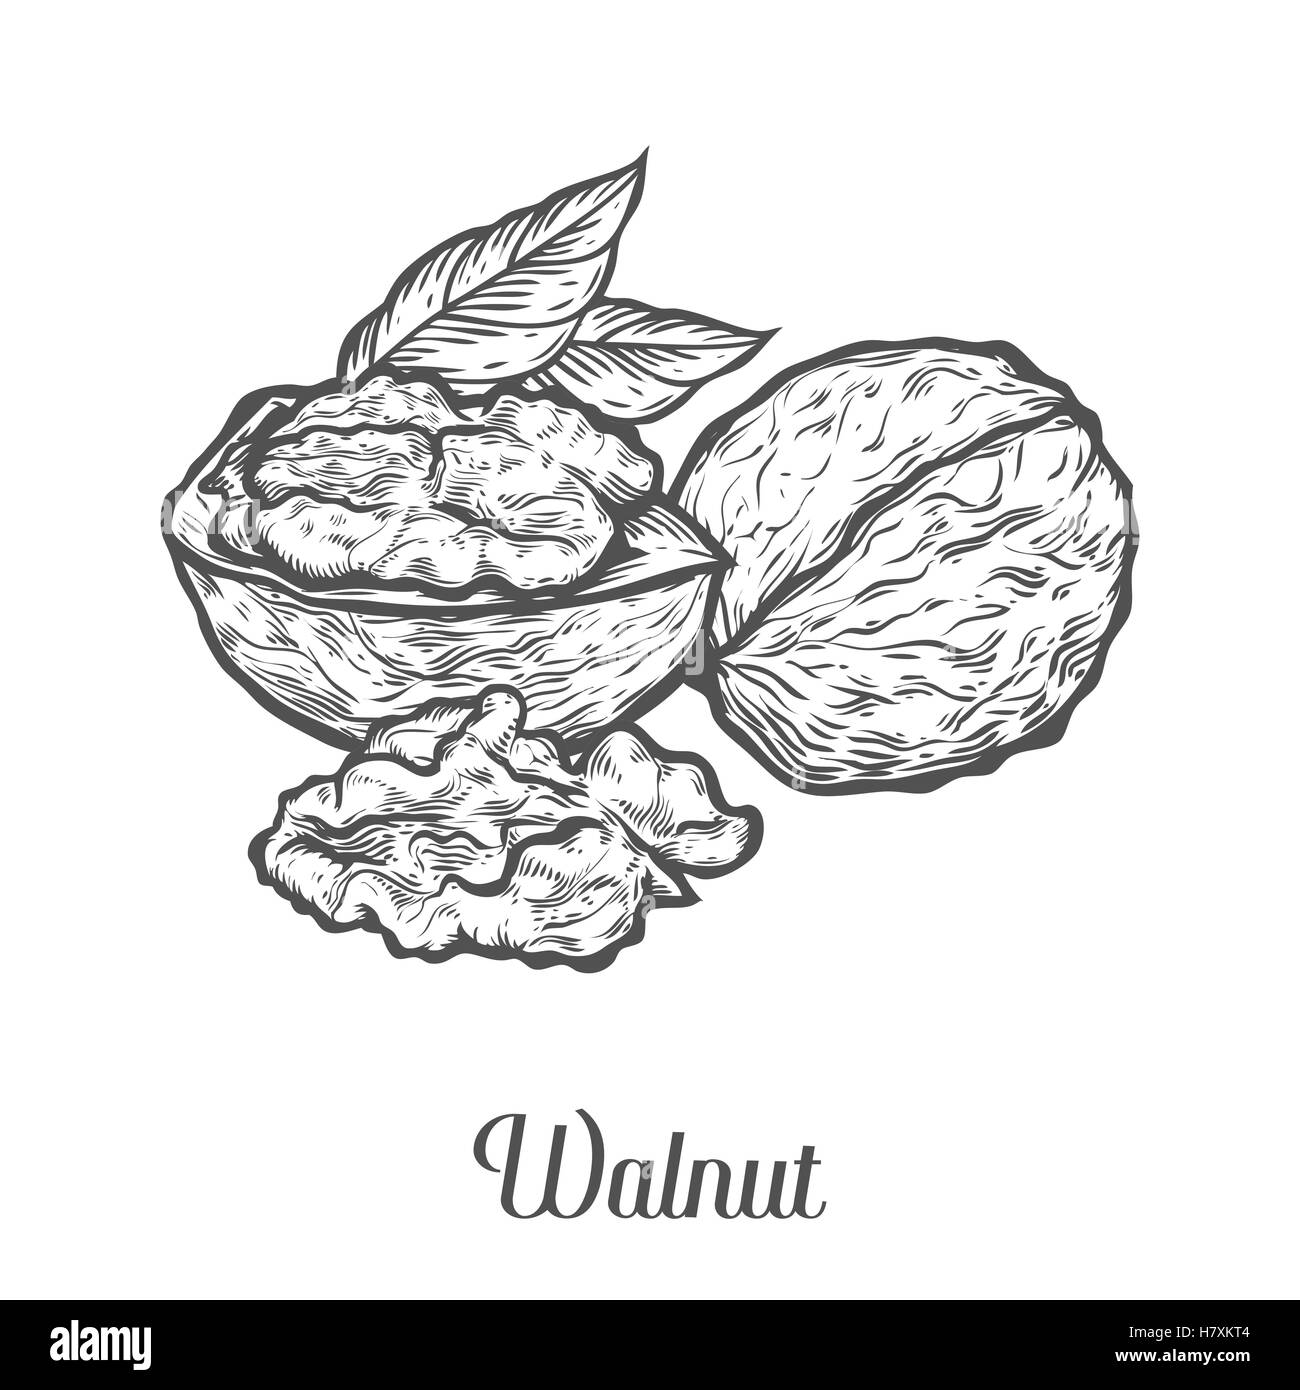 Walnut nut seed vector. Isolated on white background. Walnut food ingredient. Engraved hand drawn illustration in retro vintage  Stock Vector